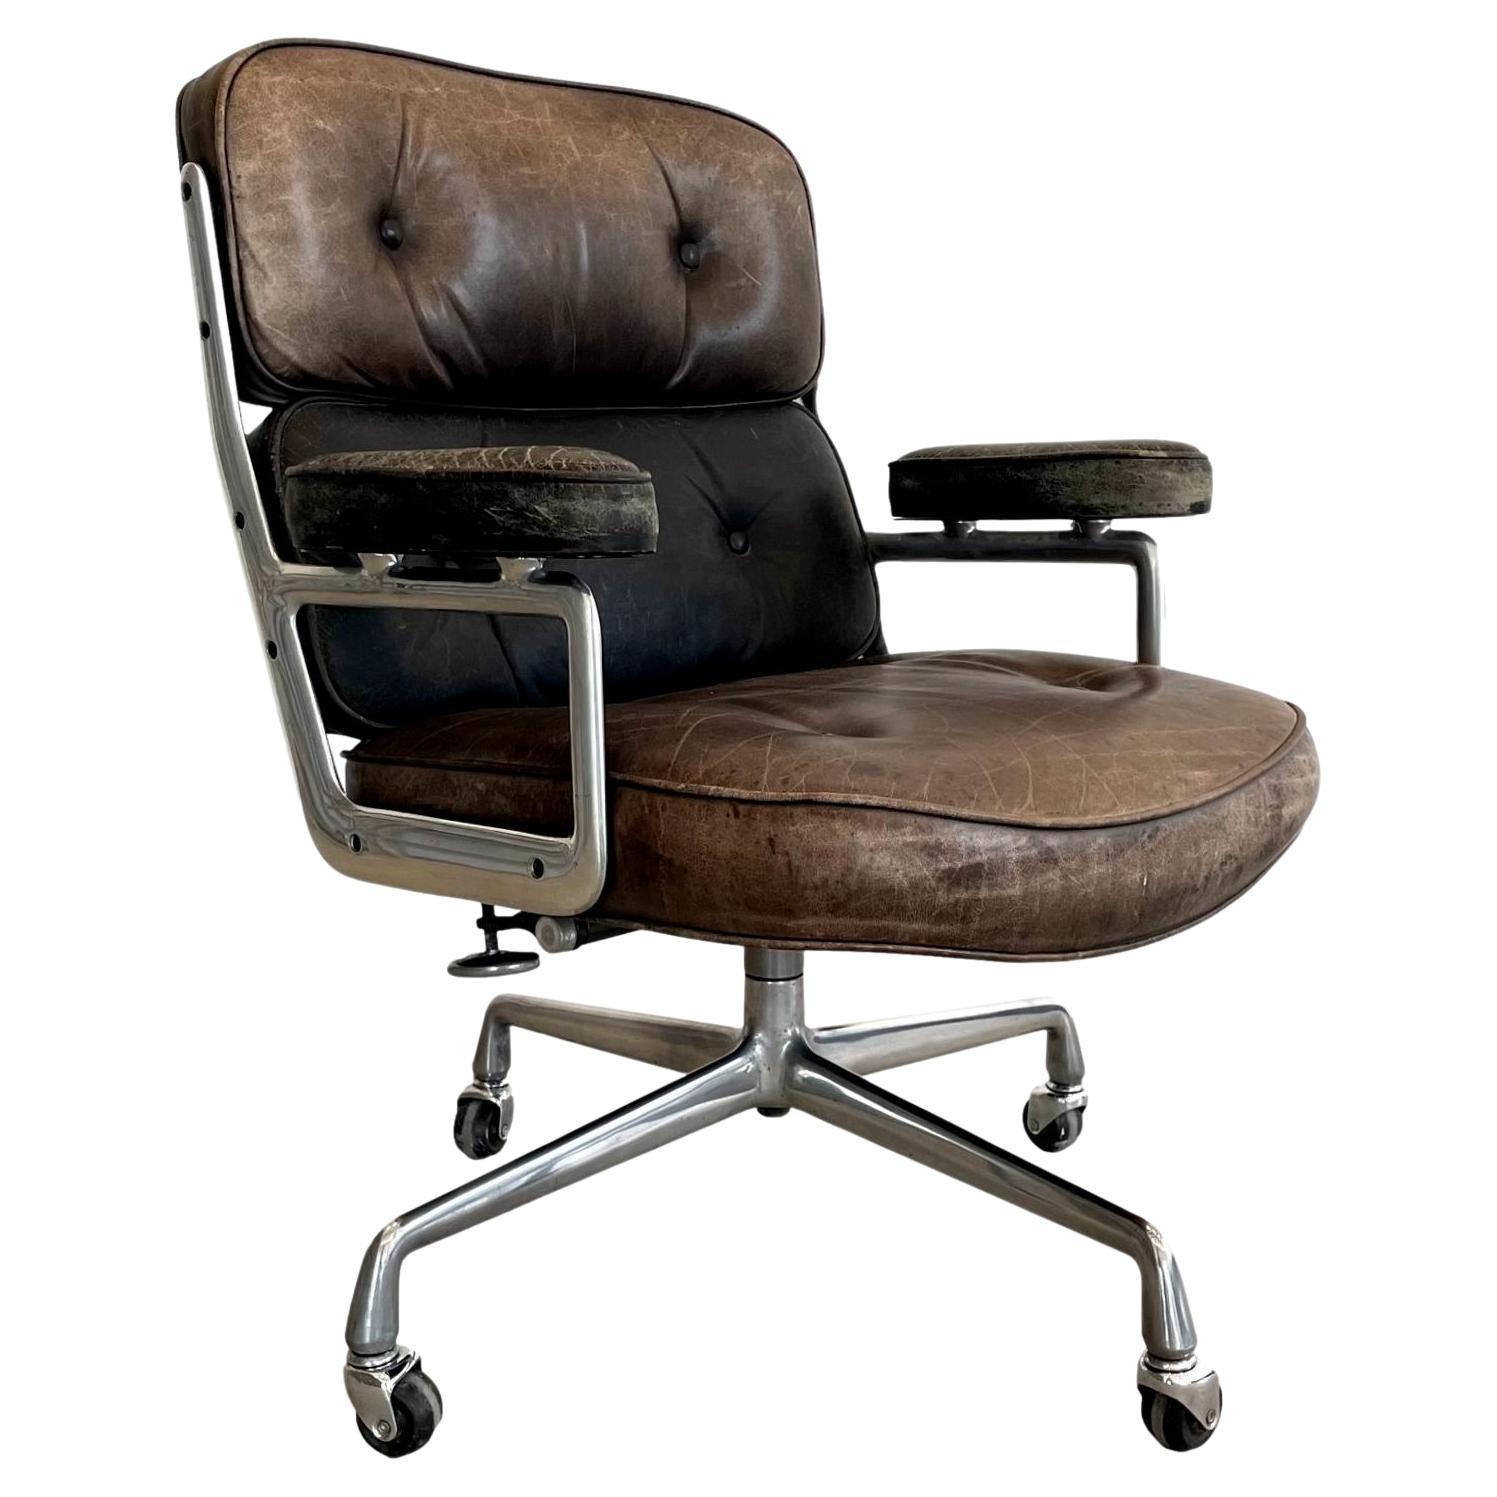 Eames Time Life Chair in Brown and Black Leather for Herman Miller, 1984 USA